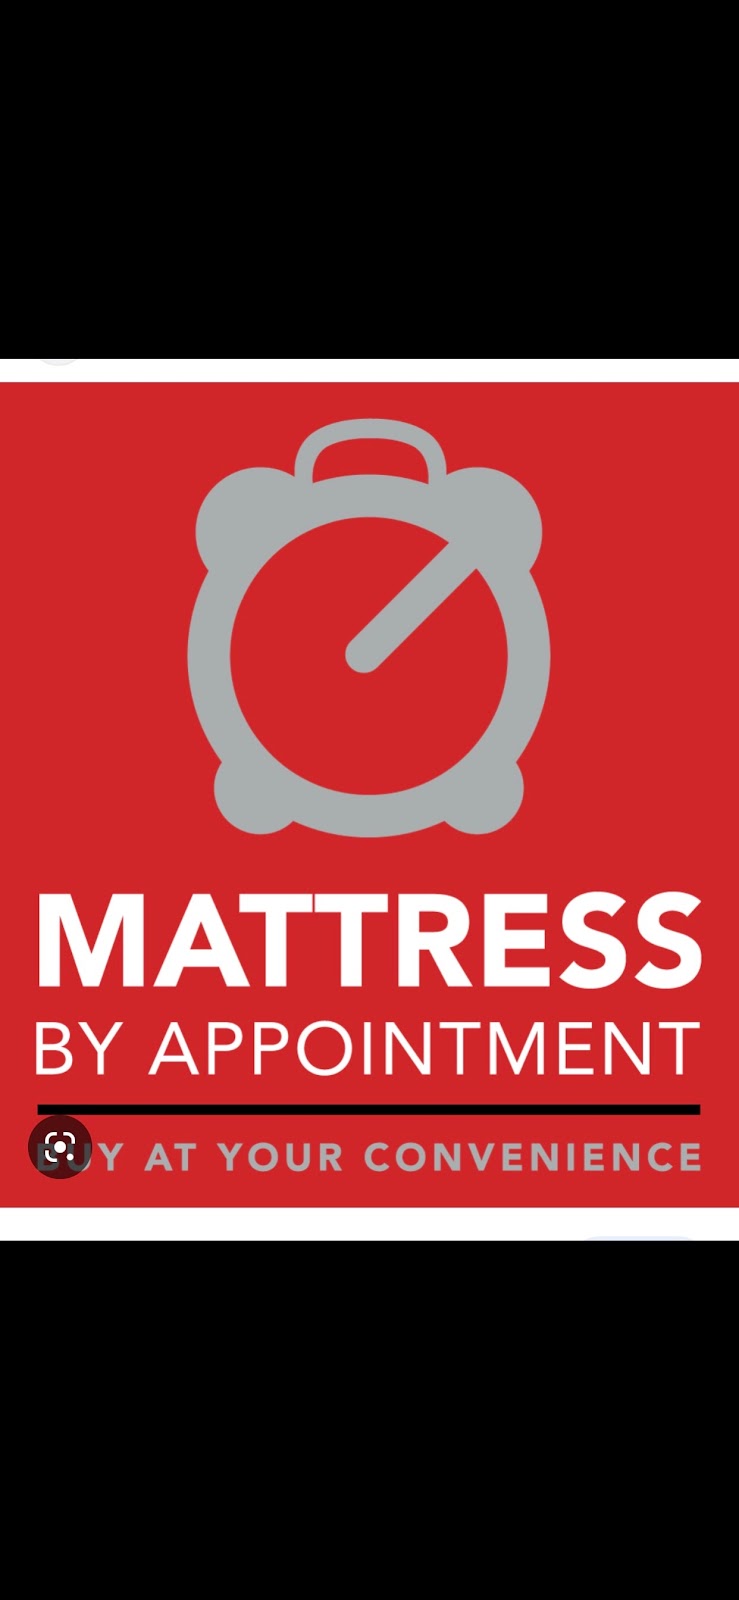 Mattress By Appointment - Owen Sound | furniture store | 1000 10th St W, Owen Sound, ON N4K 5S2, Canada | 5192700845 OR +1 519-270-0845